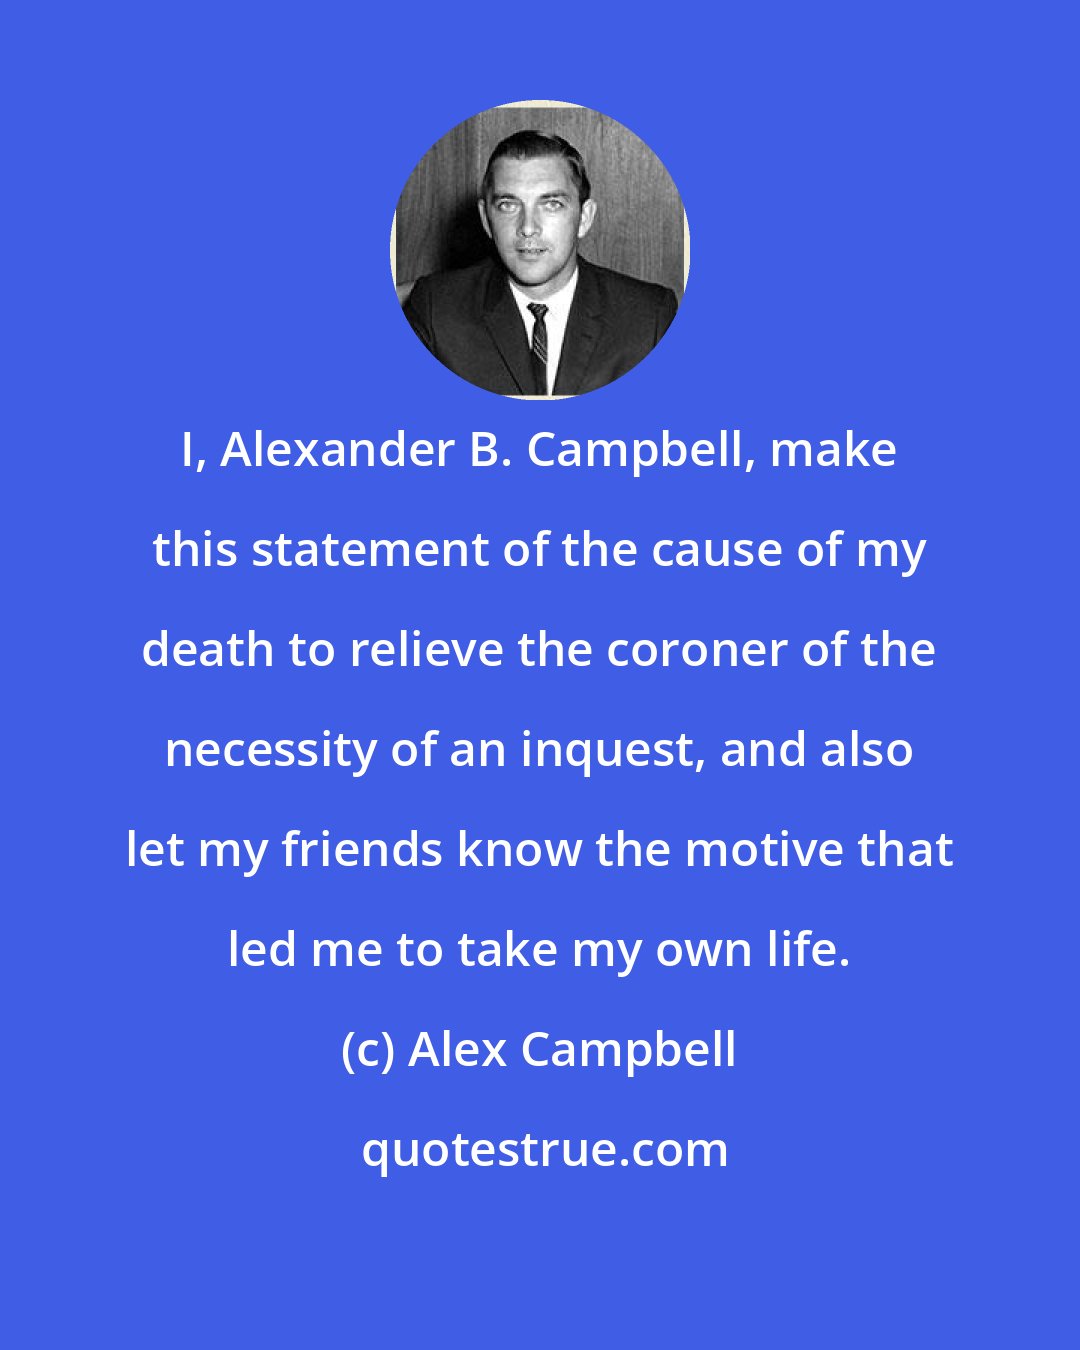 Alex Campbell: I, Alexander B. Campbell, make this statement of the cause of my death to relieve the coroner of the necessity of an inquest, and also let my friends know the motive that led me to take my own life.